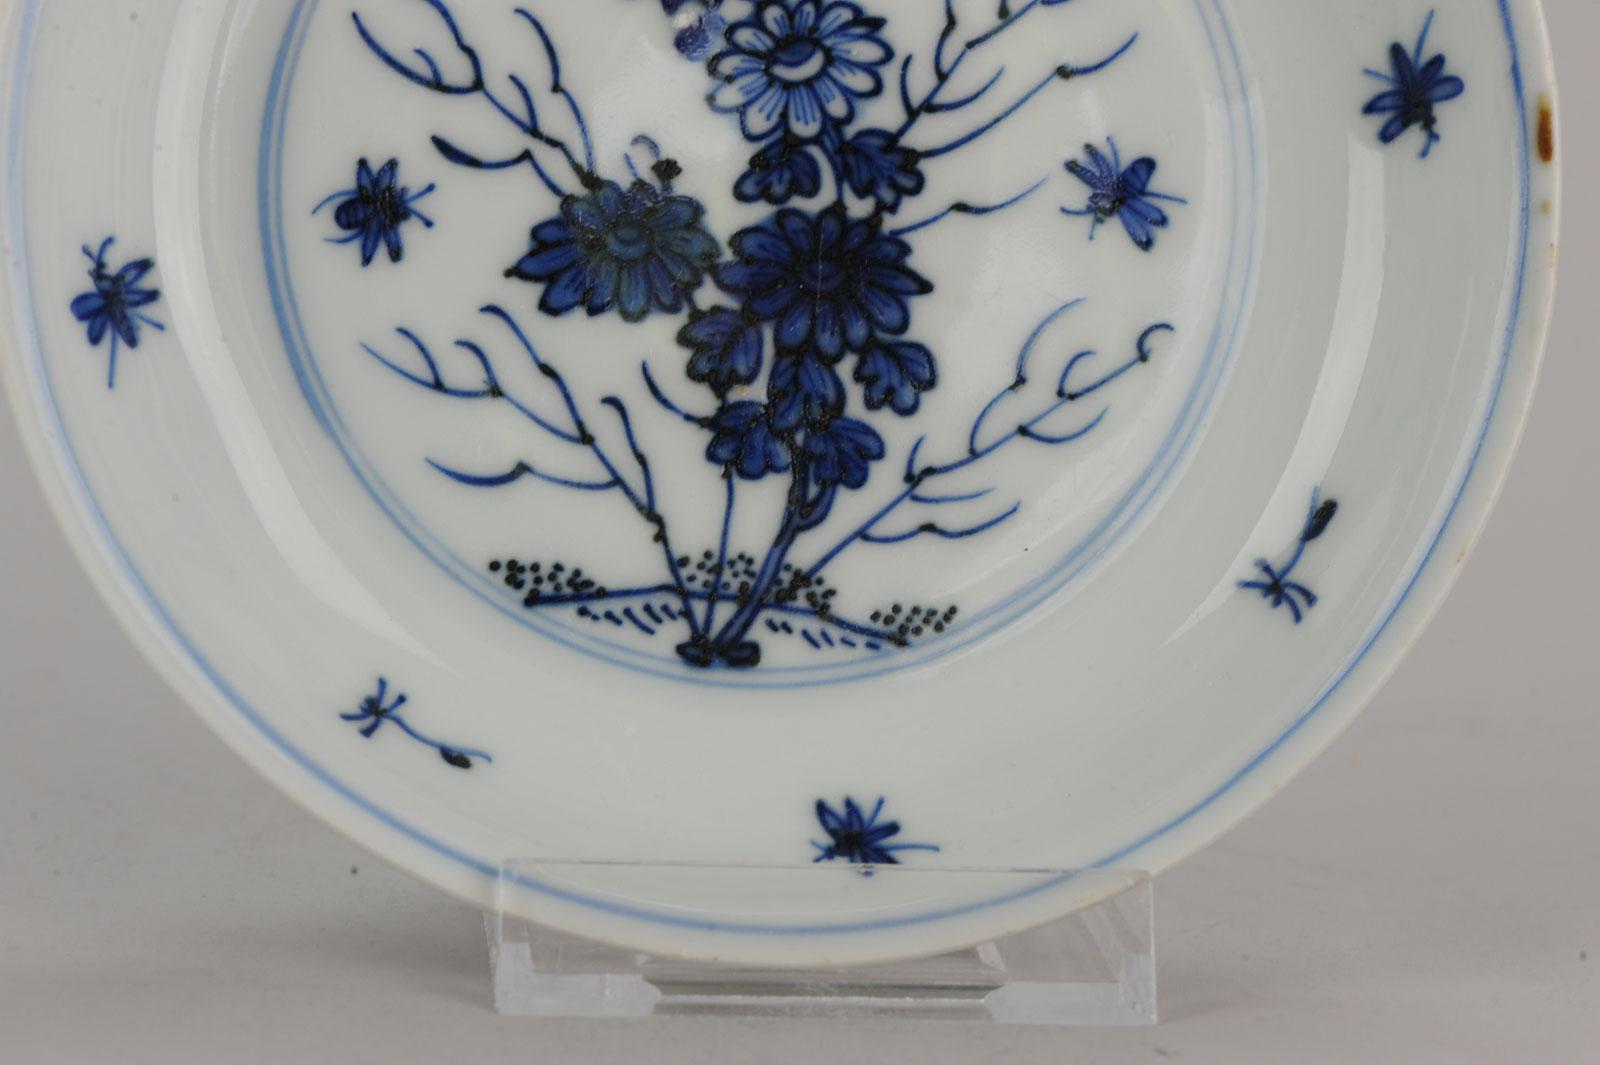 Antique Chinese Porcelain Plate 17th Century Ming Dynasty Tianqi/Chongzhen 6